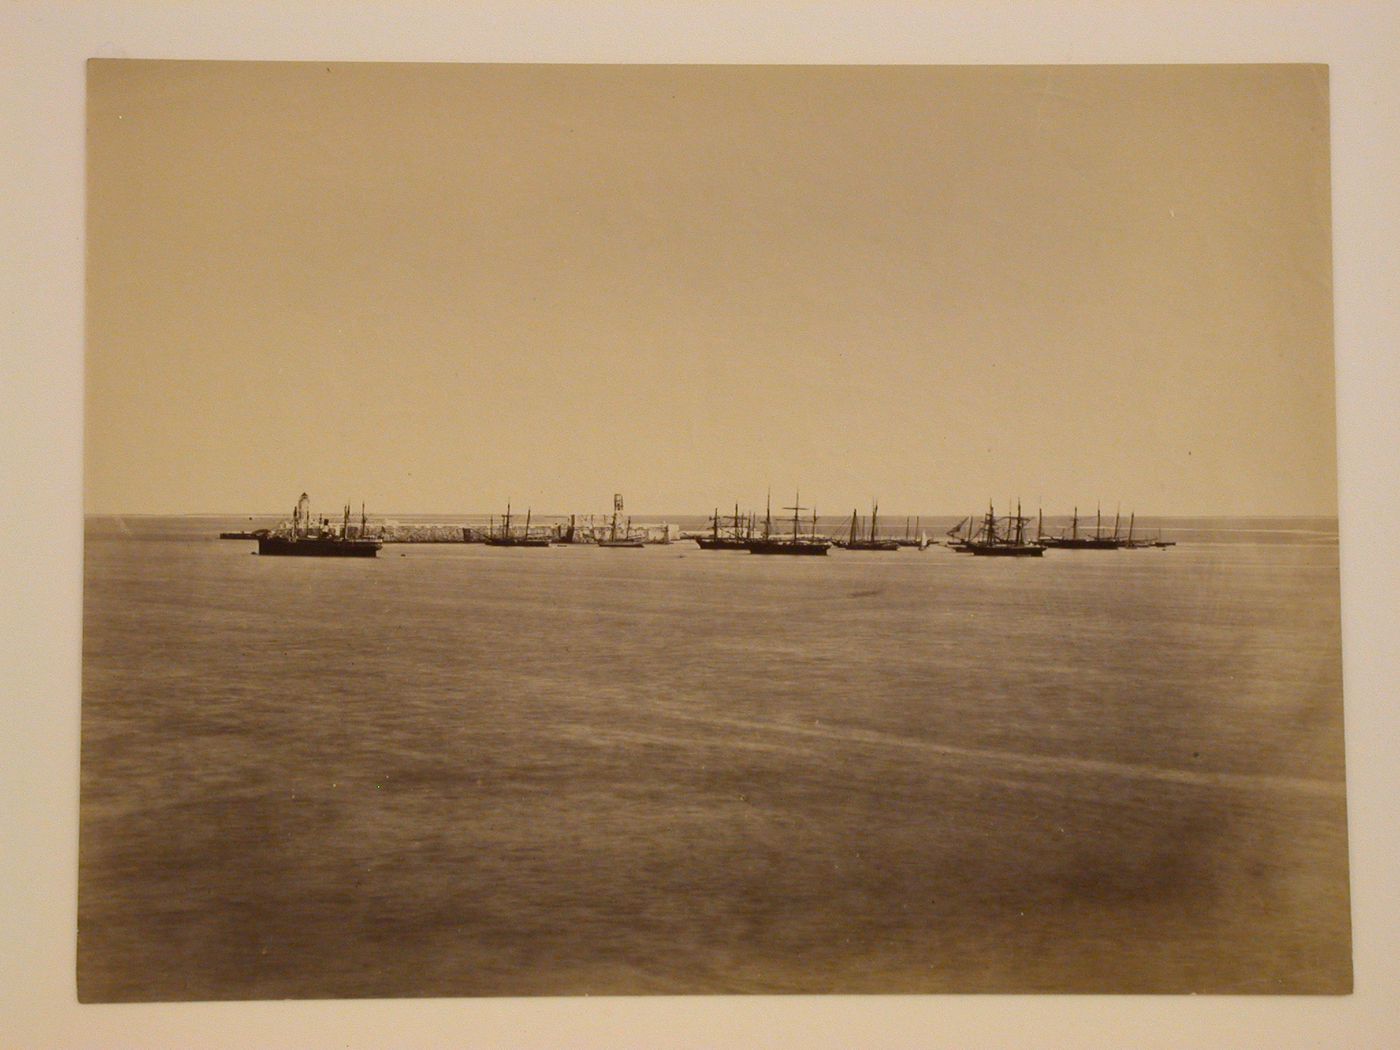 View of the Gulf of Mexico showing a pier with boats, Veracruz, Mexico